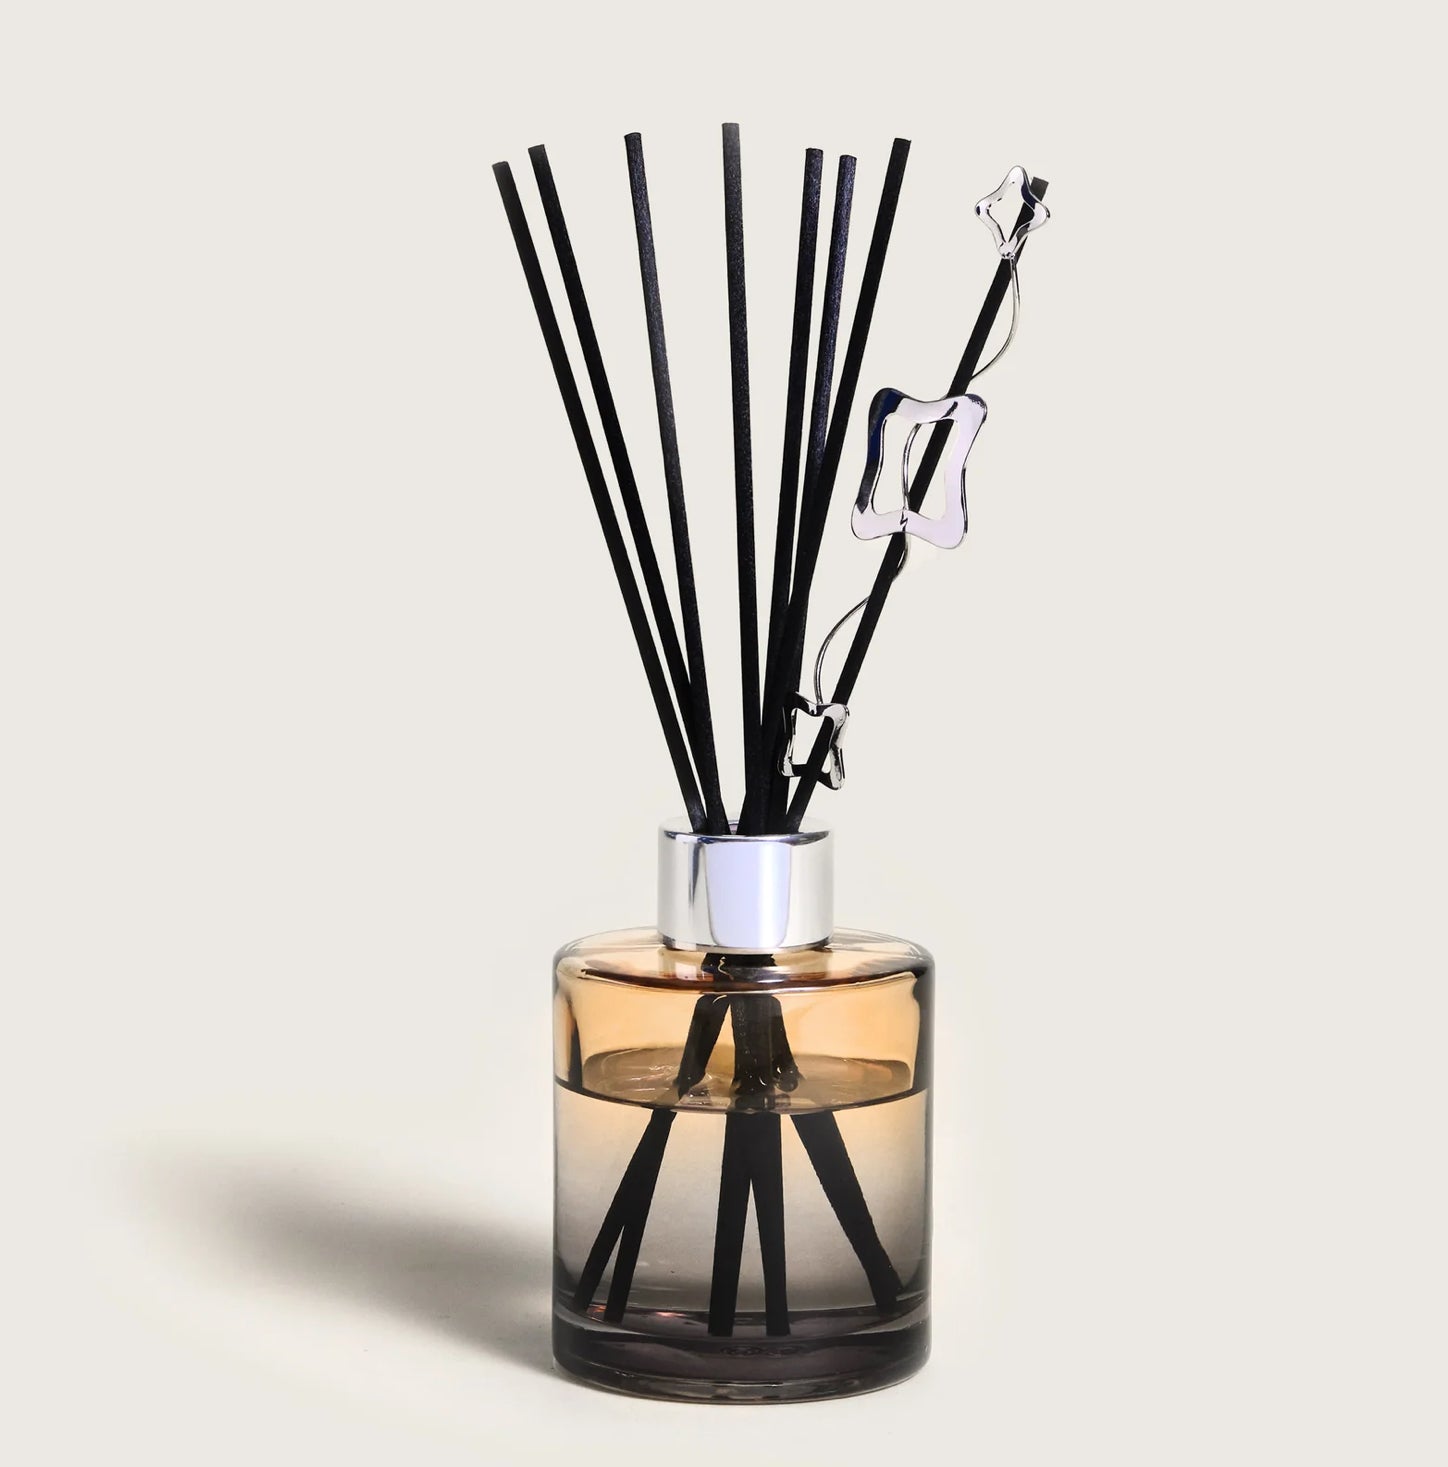 Maison Berger Diffusers